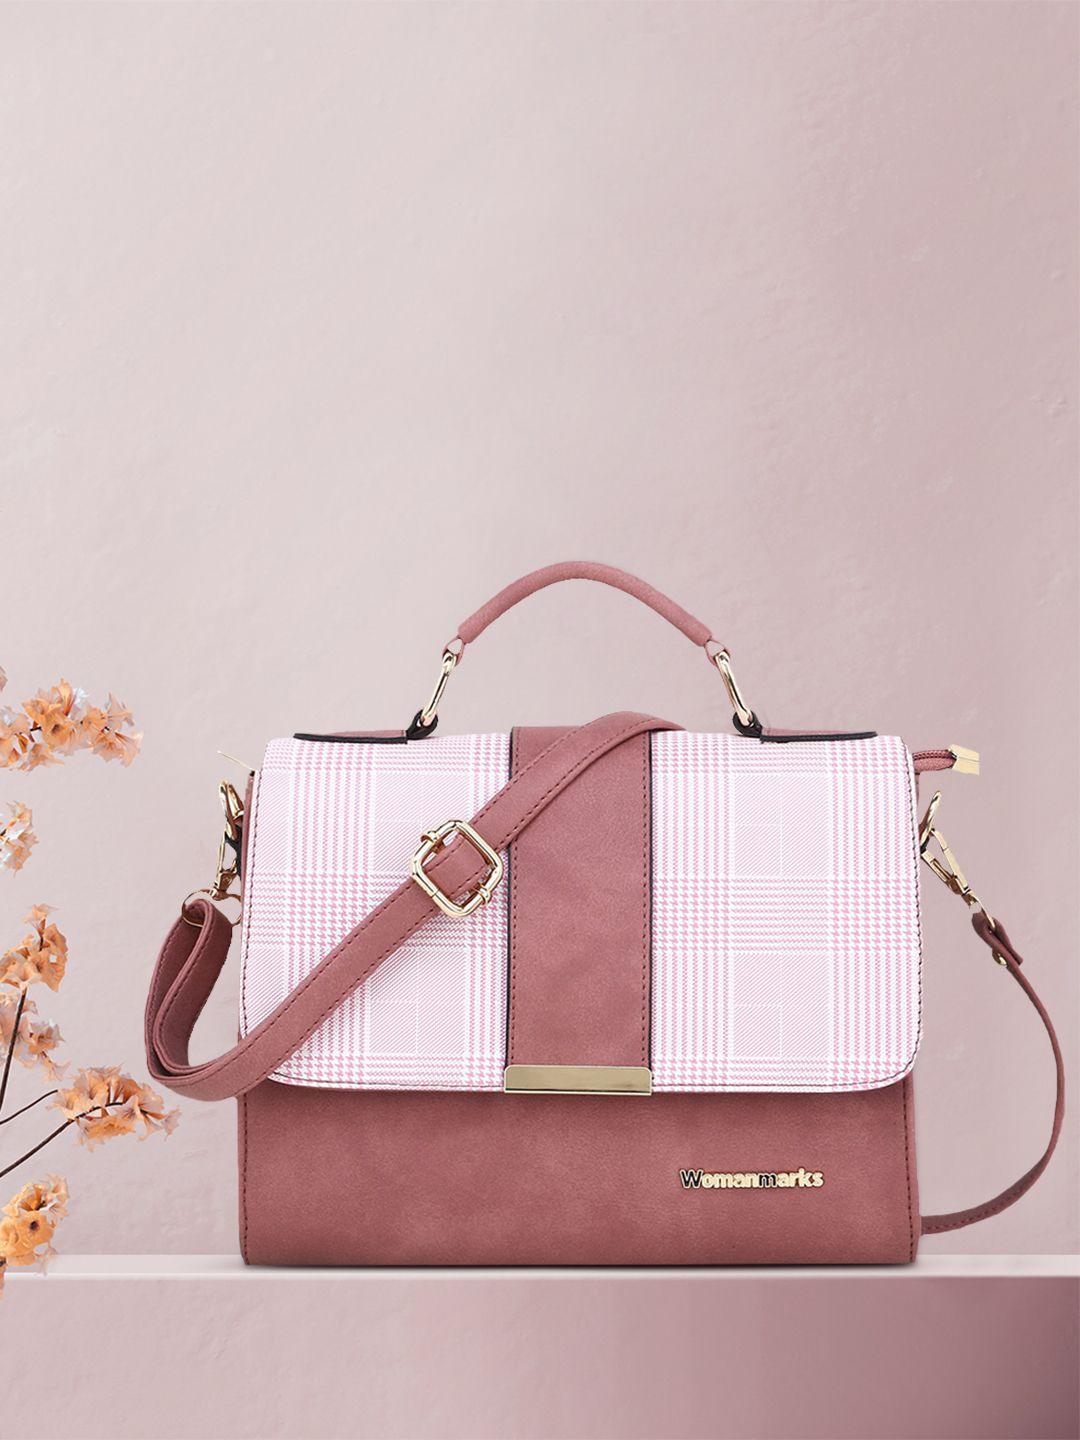 women marks pink checked sling bag